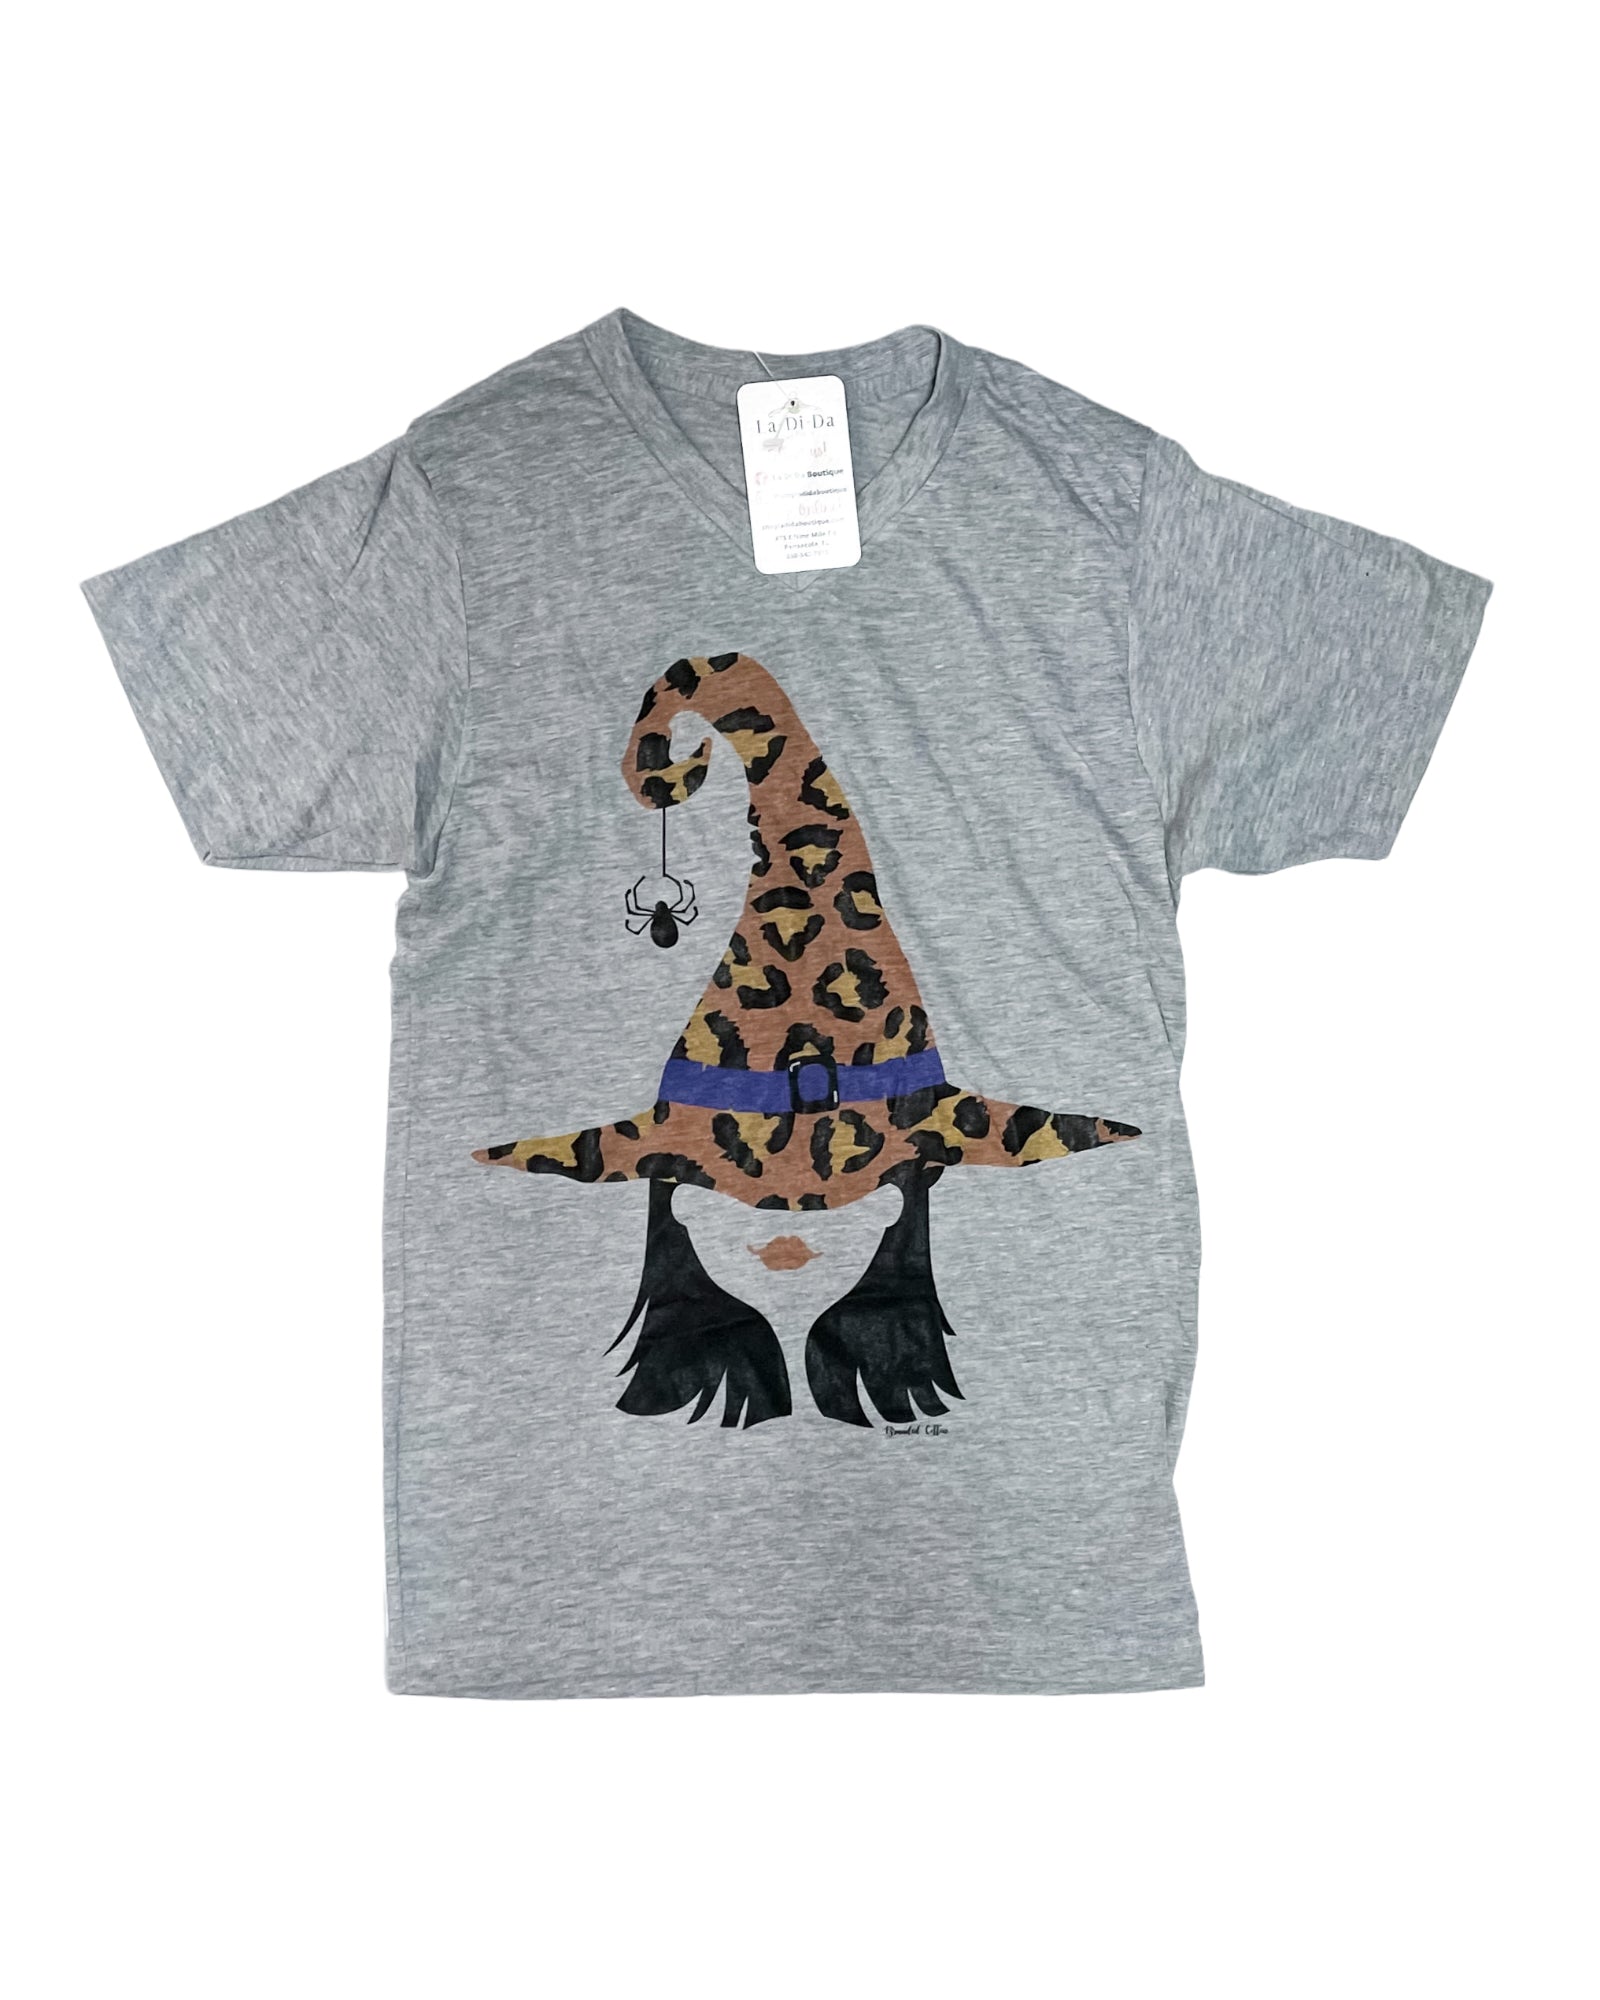 penacola florida graphic tee vneck boutique online shopping witch spider leopard print spider halloween graphic tee